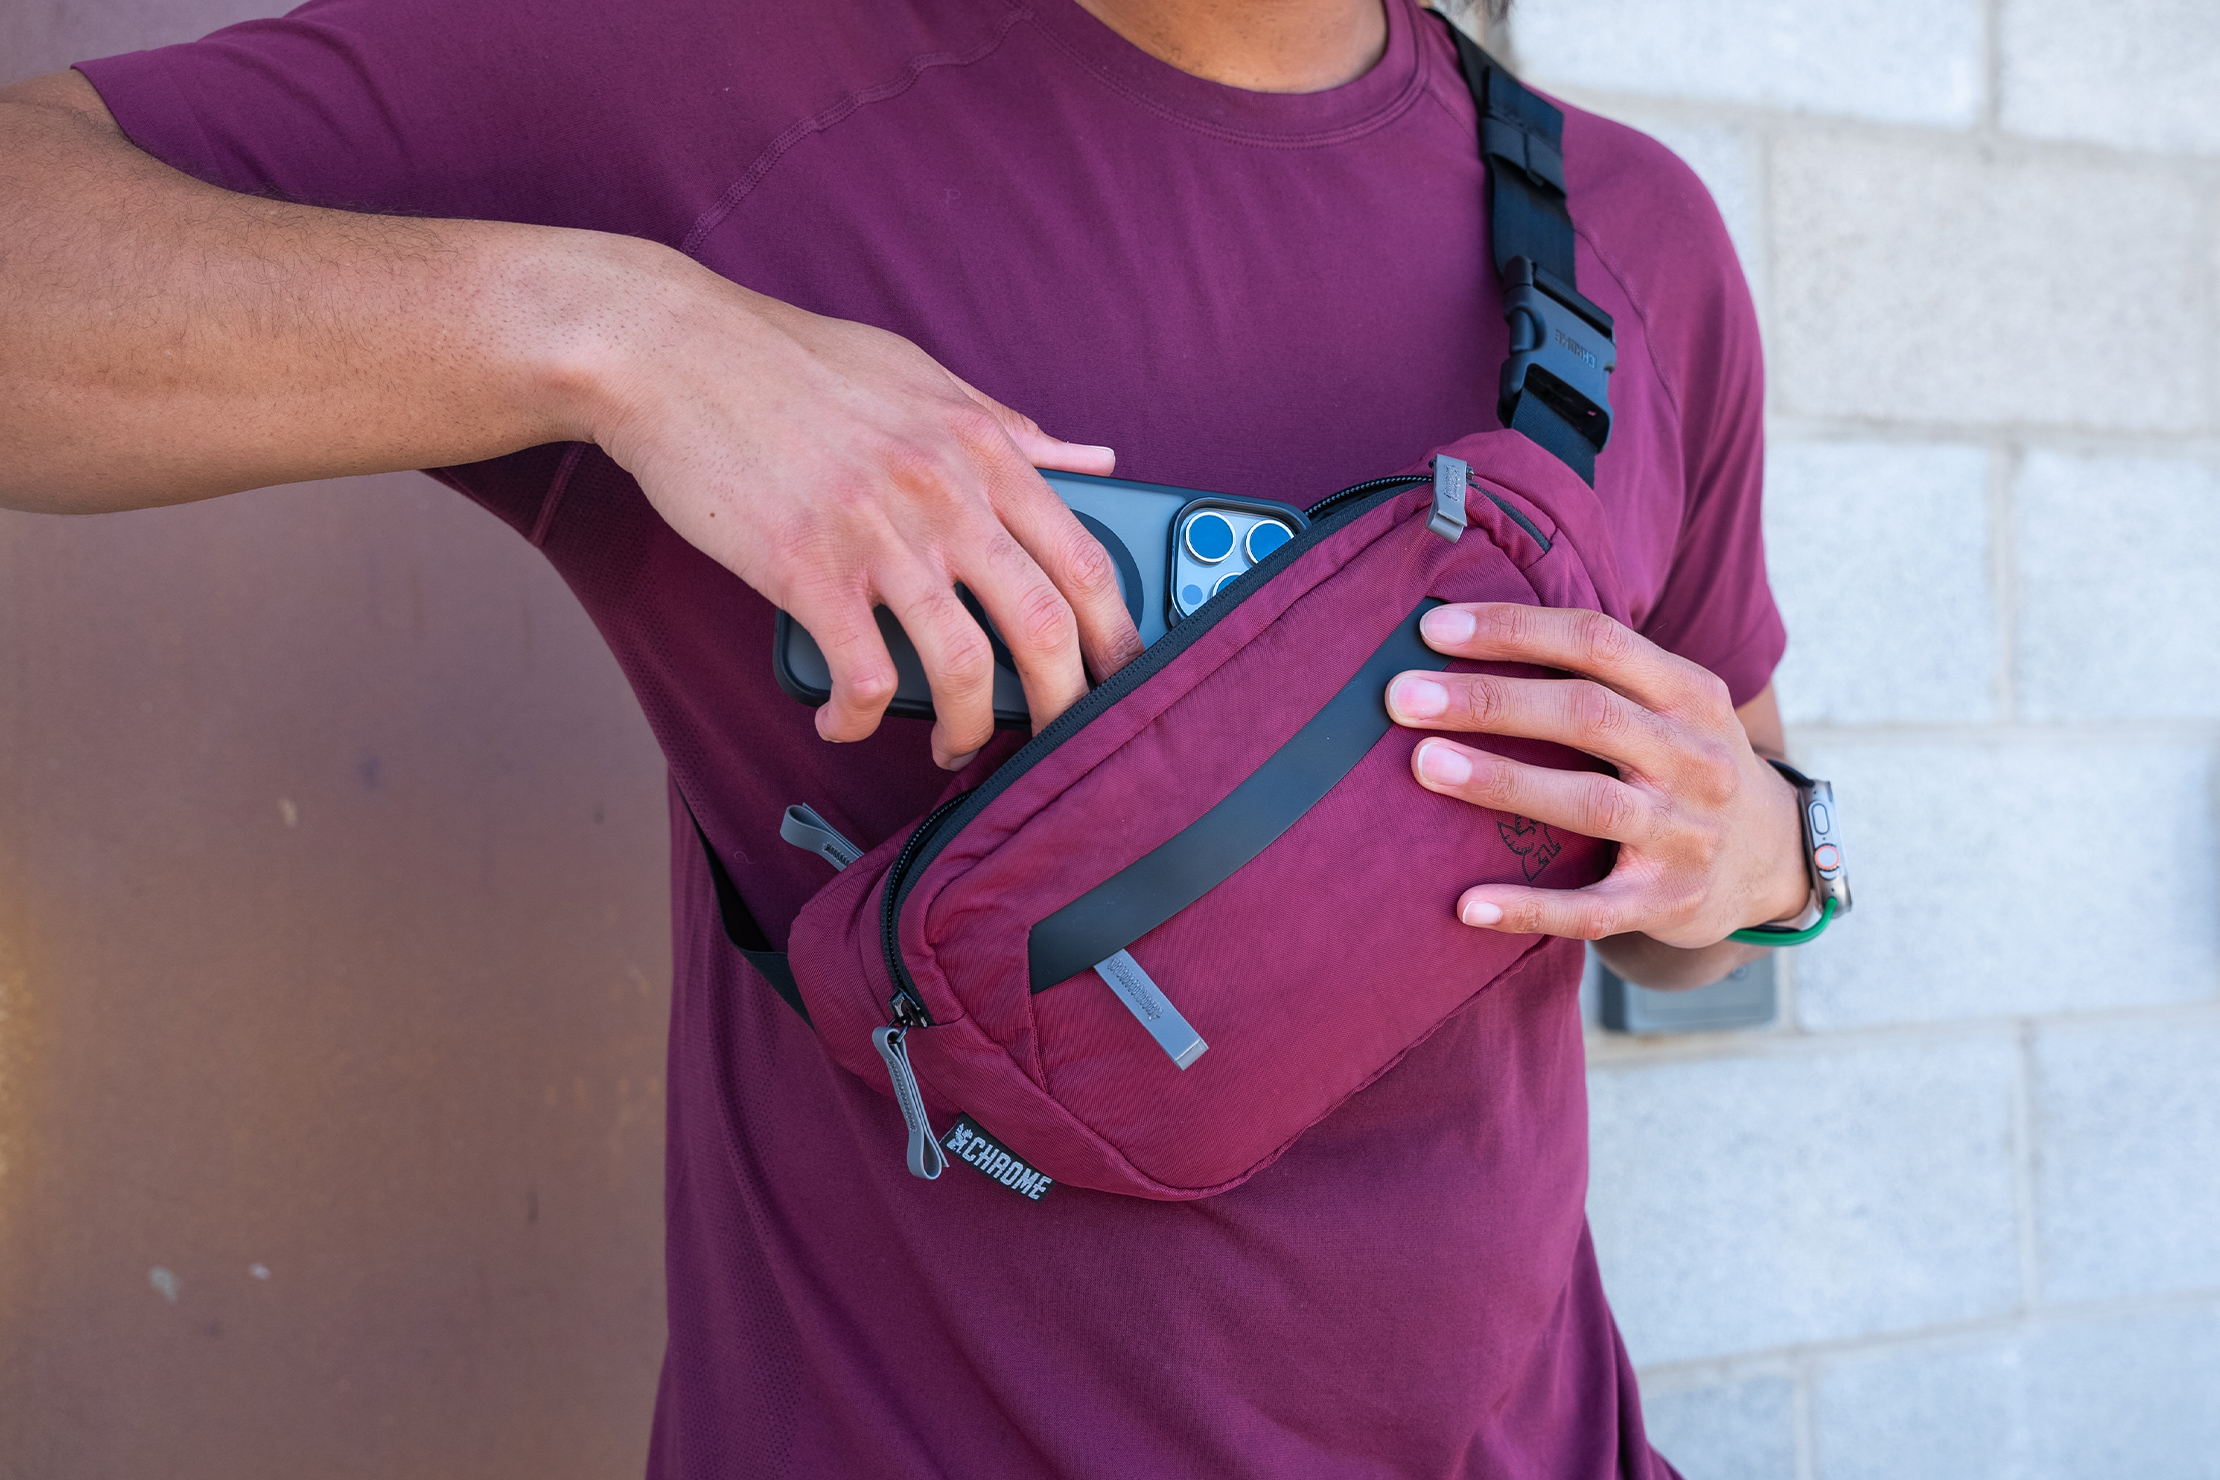 Chrome Industries Sabin 3L Sling In Use